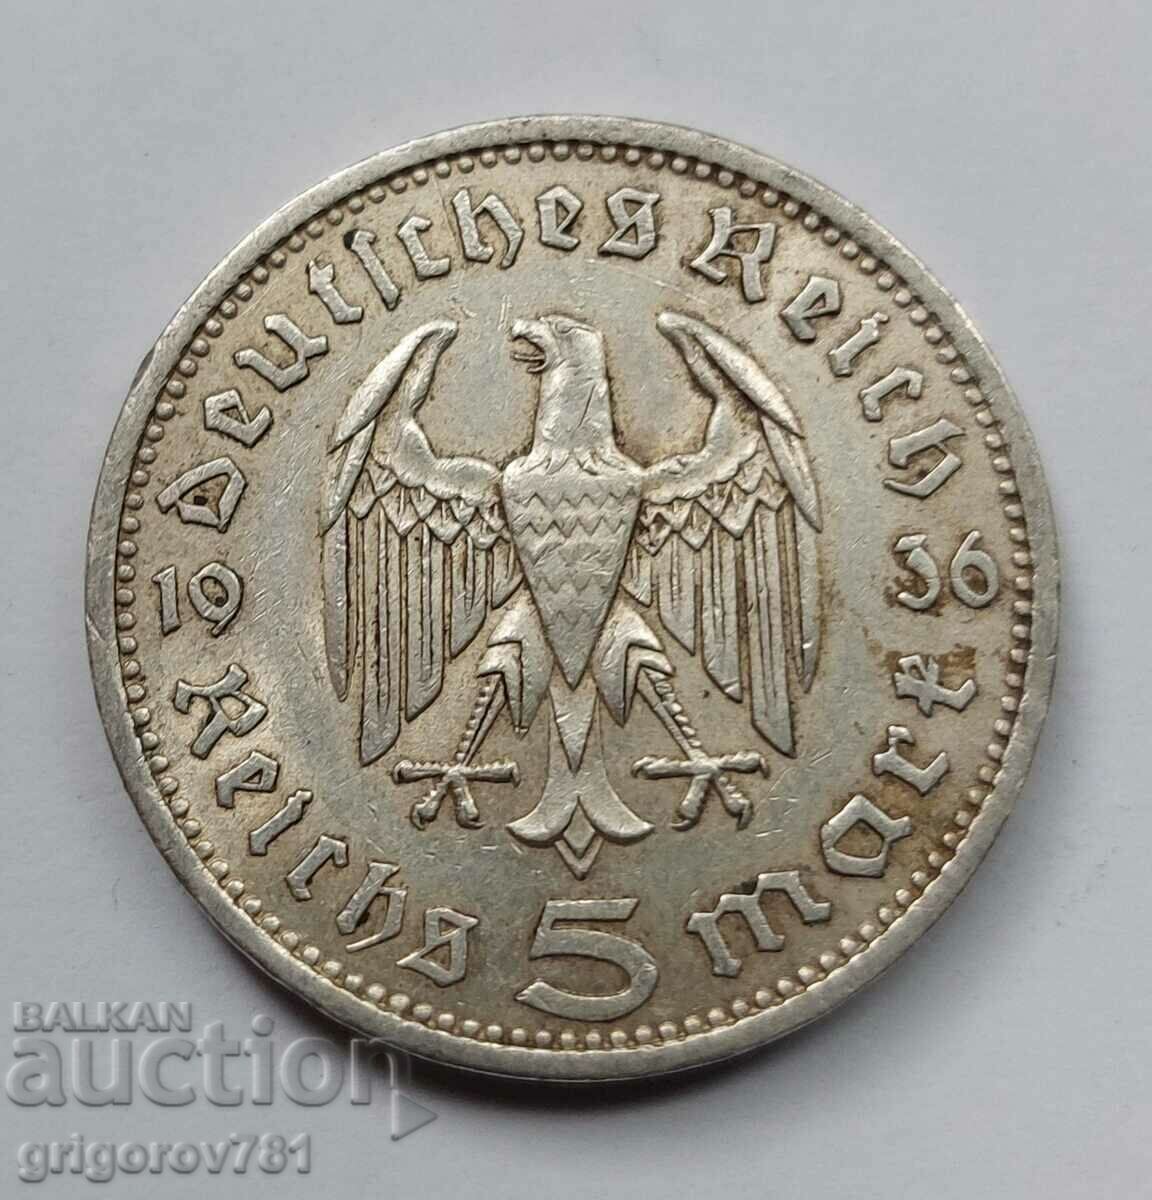 5 Mark Silver Germany 1936 A III Reich Silver Coin #46